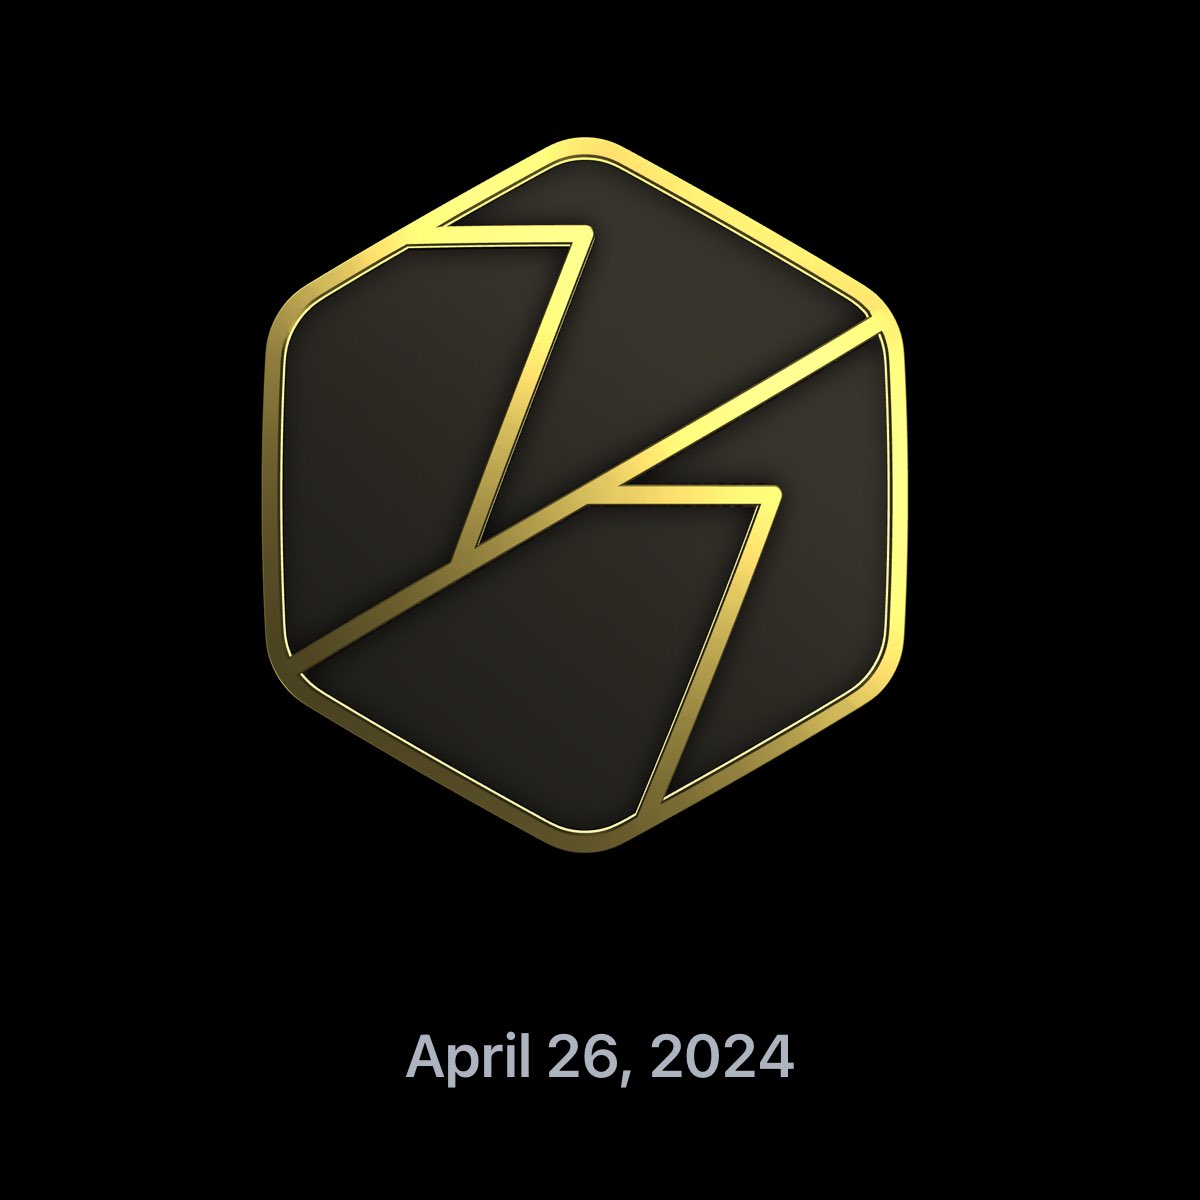 I completed seven workouts during the week of April 26 with my #AppleWatch ⌚️. #backontrack 🚂